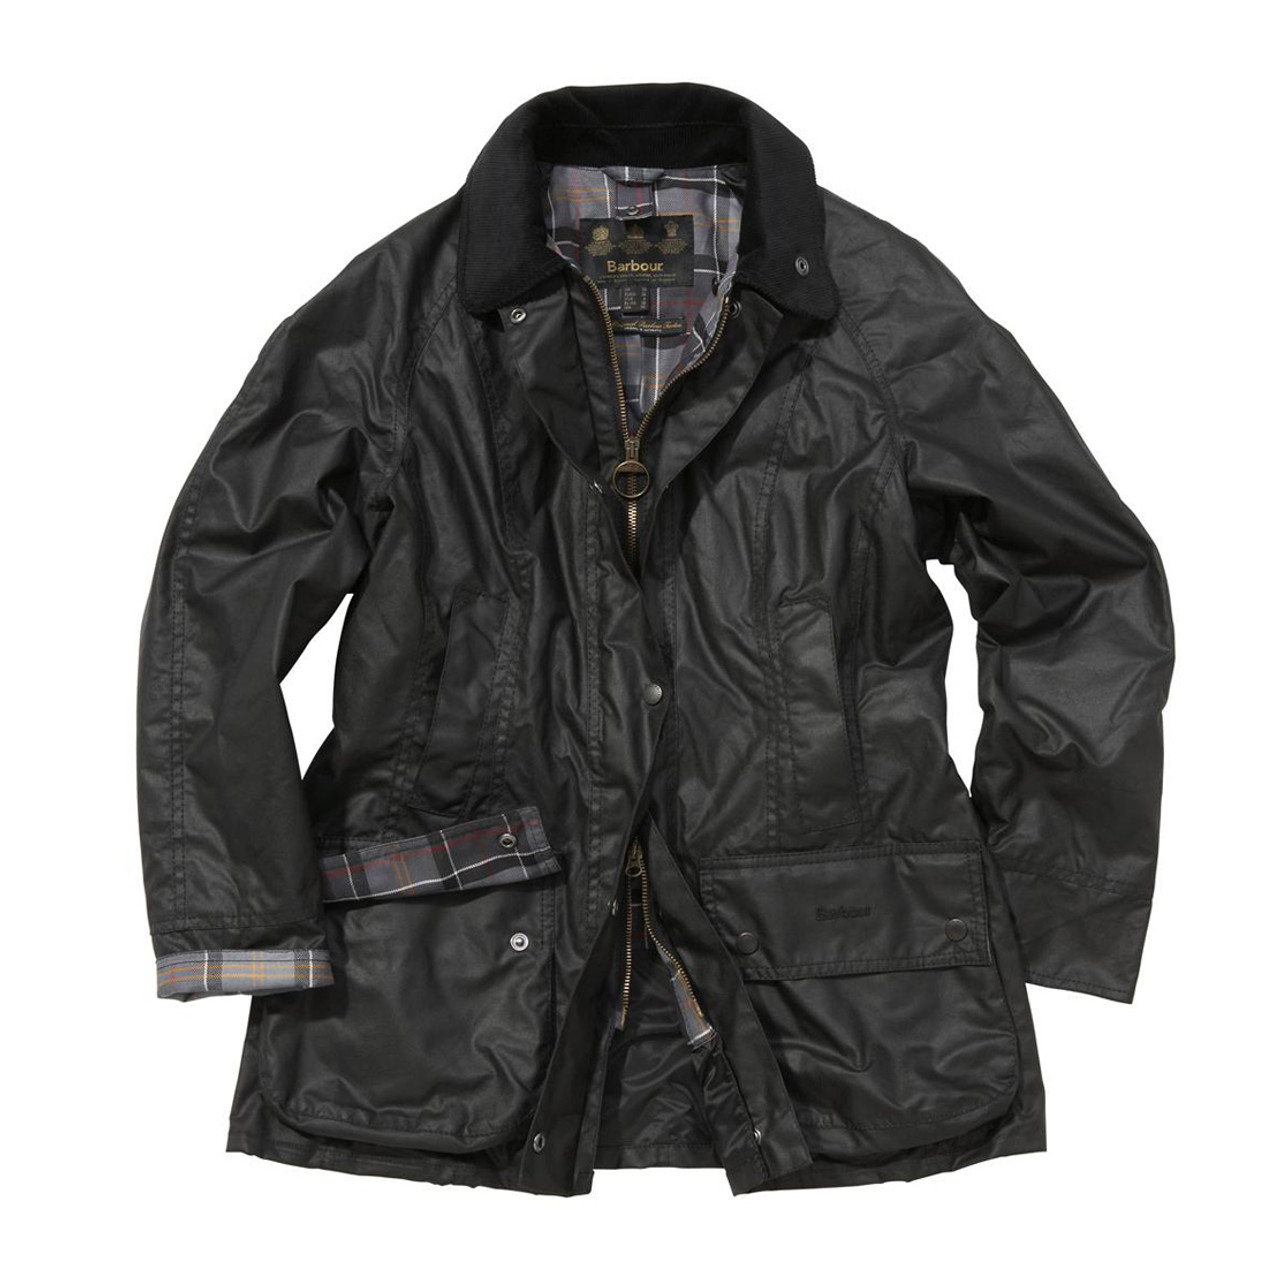 Barbour Women's Beadnell Waxed Cotton Jacket - Black.